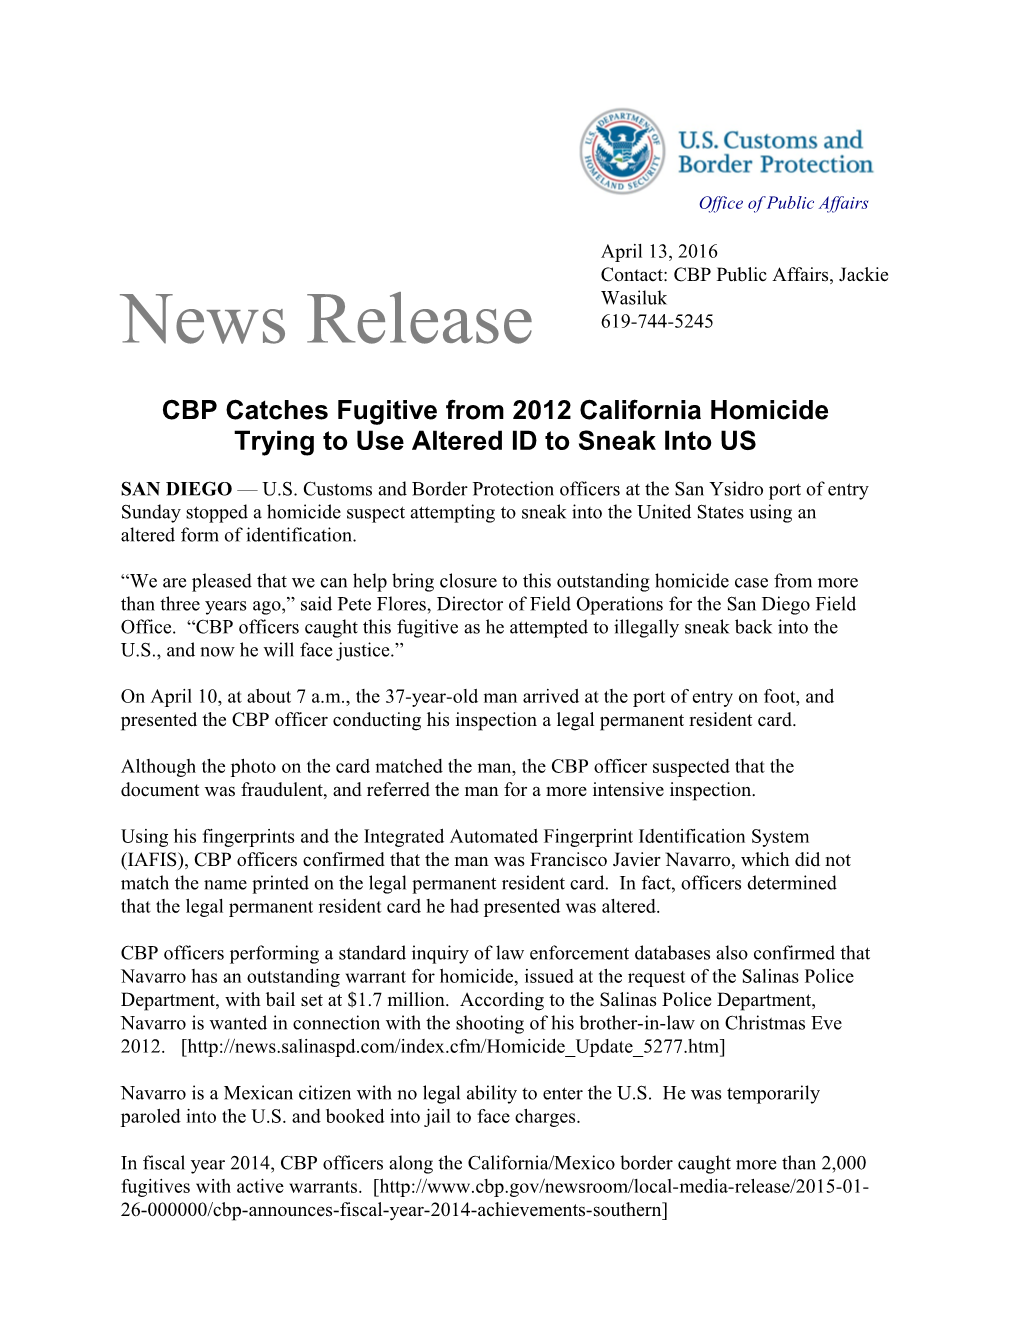 CBP Catches Fugitive from 2012 California Homicide Trying to Use Altered ID to Sneak Into US